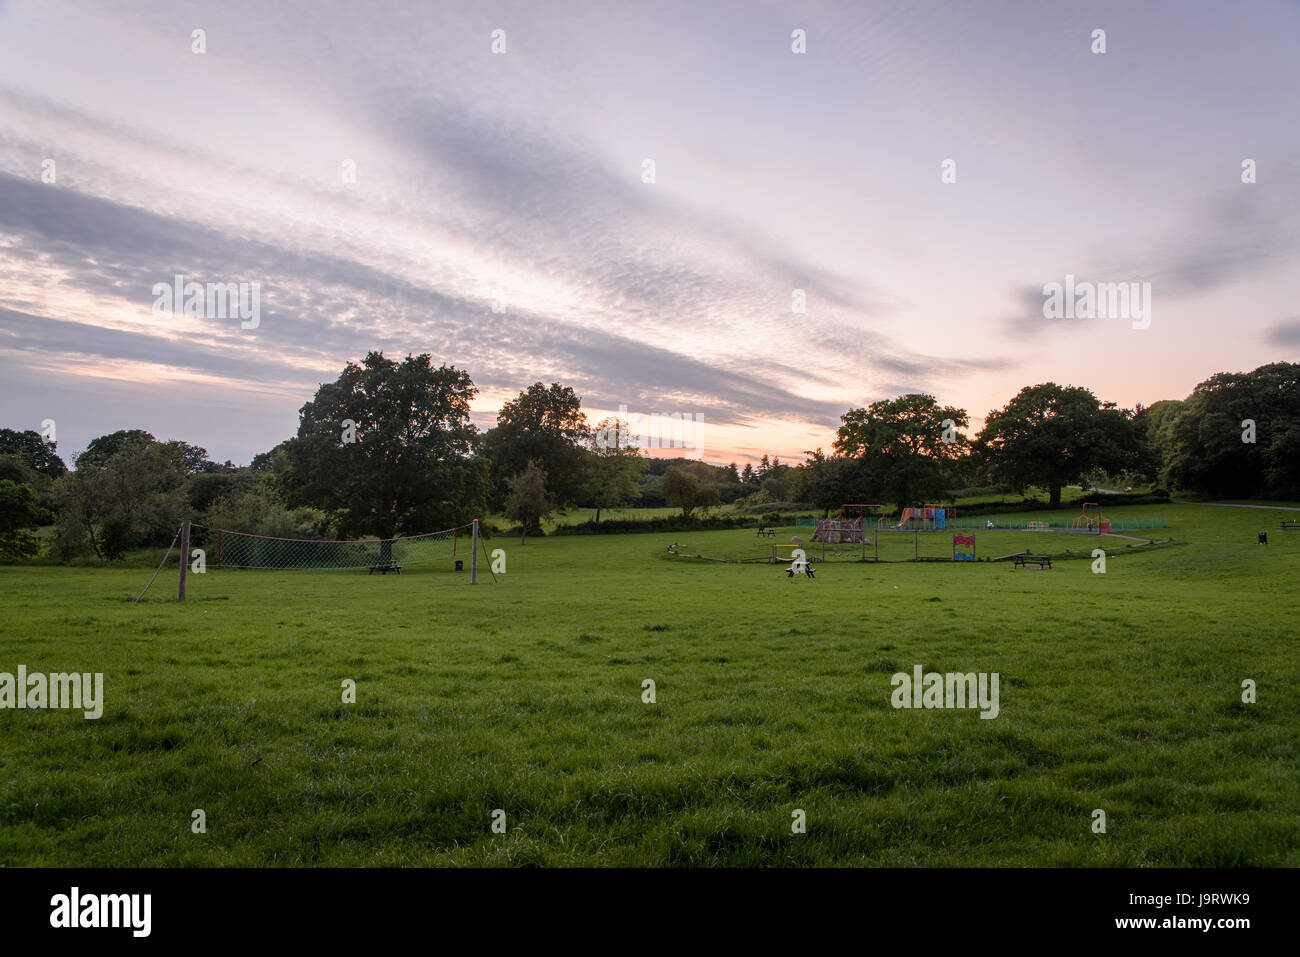 A moody sky with beautiful clouds at sunset in the evening across a field Stock Photo